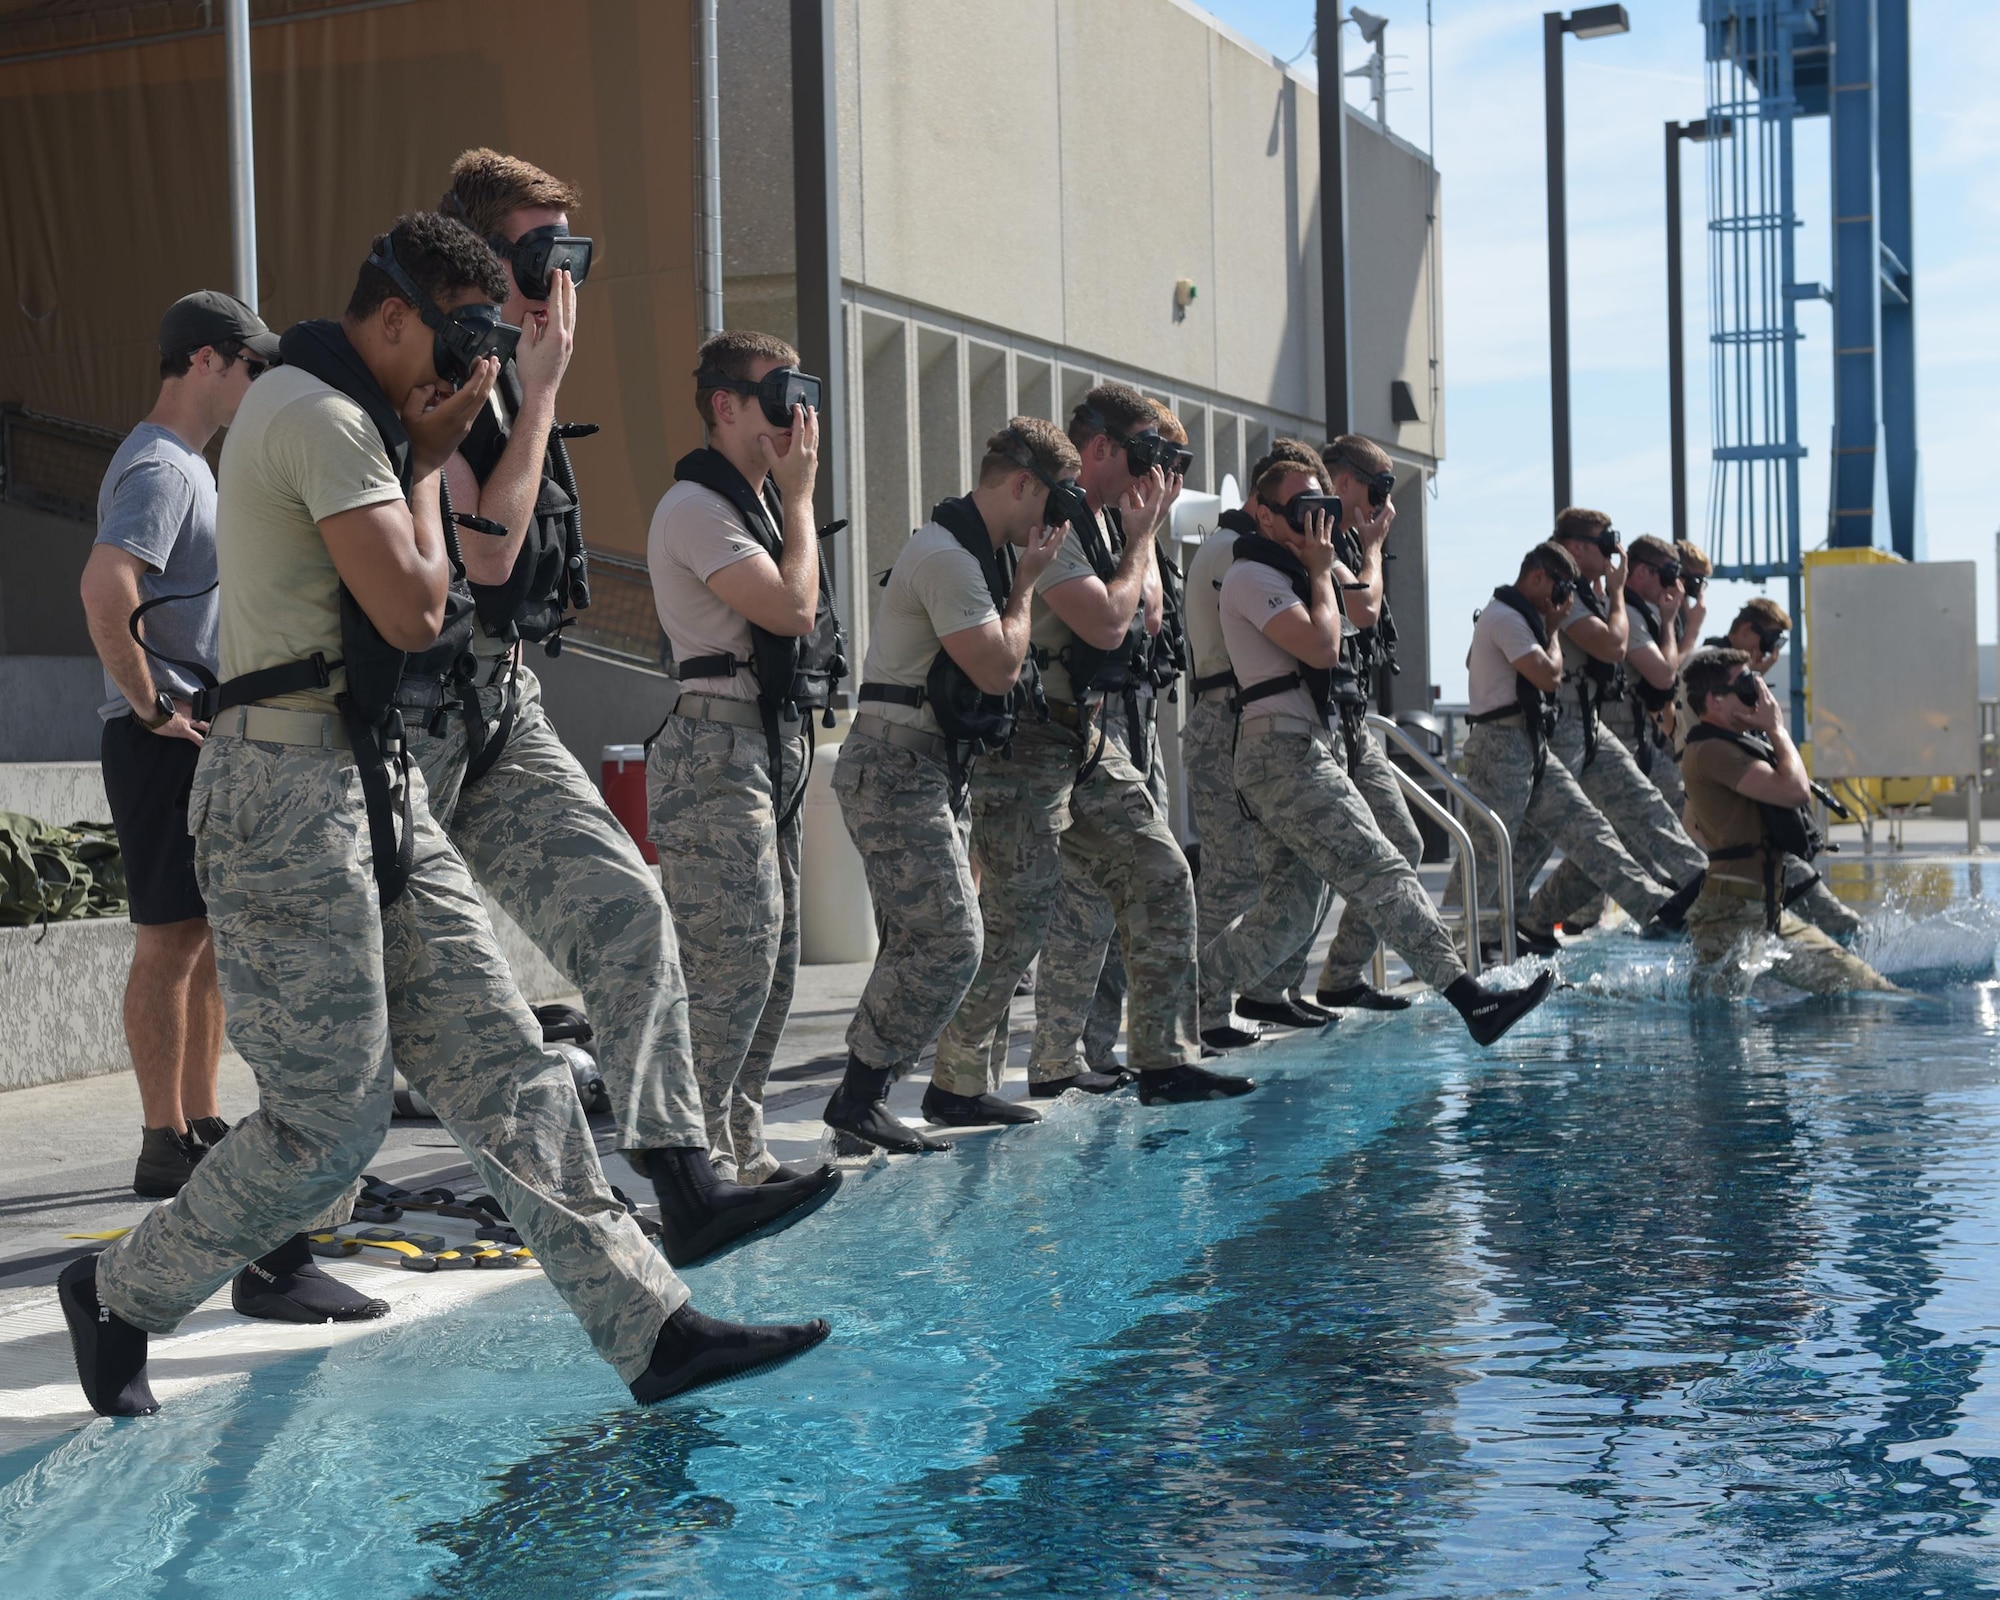 U.S. Air Force diving students take the plunge for their first dive of the day at Naval Support Activity Panama City, Fla., Aug. 2, 2017. The Naval Diving and Salvage Training Center is the home of research, development, testing and evaluation on diving matters. Certification and training is conducted constantly to support the nation's military diving requirements.